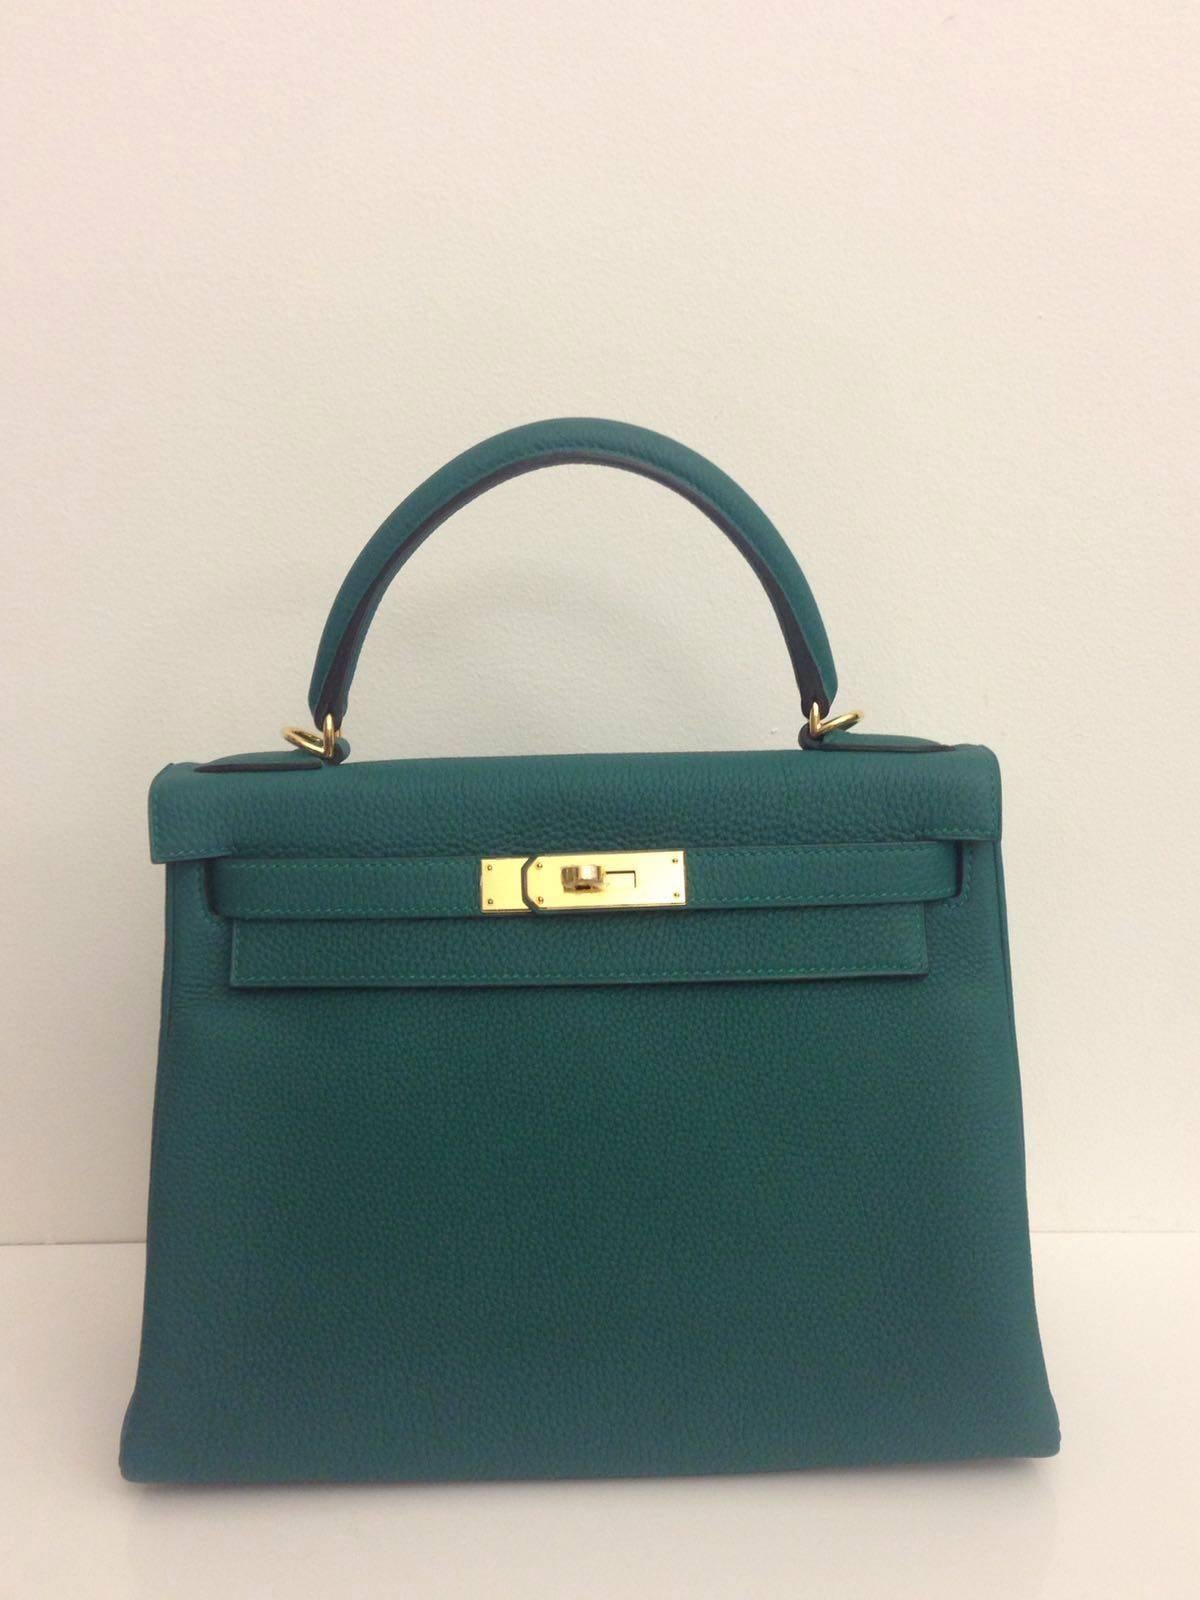 Hermes, Kelly, Size 28, Color Green Malachite, Leather Togo, Gold Hardware.

This Kelly comes with a cross body strap. box, dustbag, raincoat, leather guide booklet, clochette and reciept.